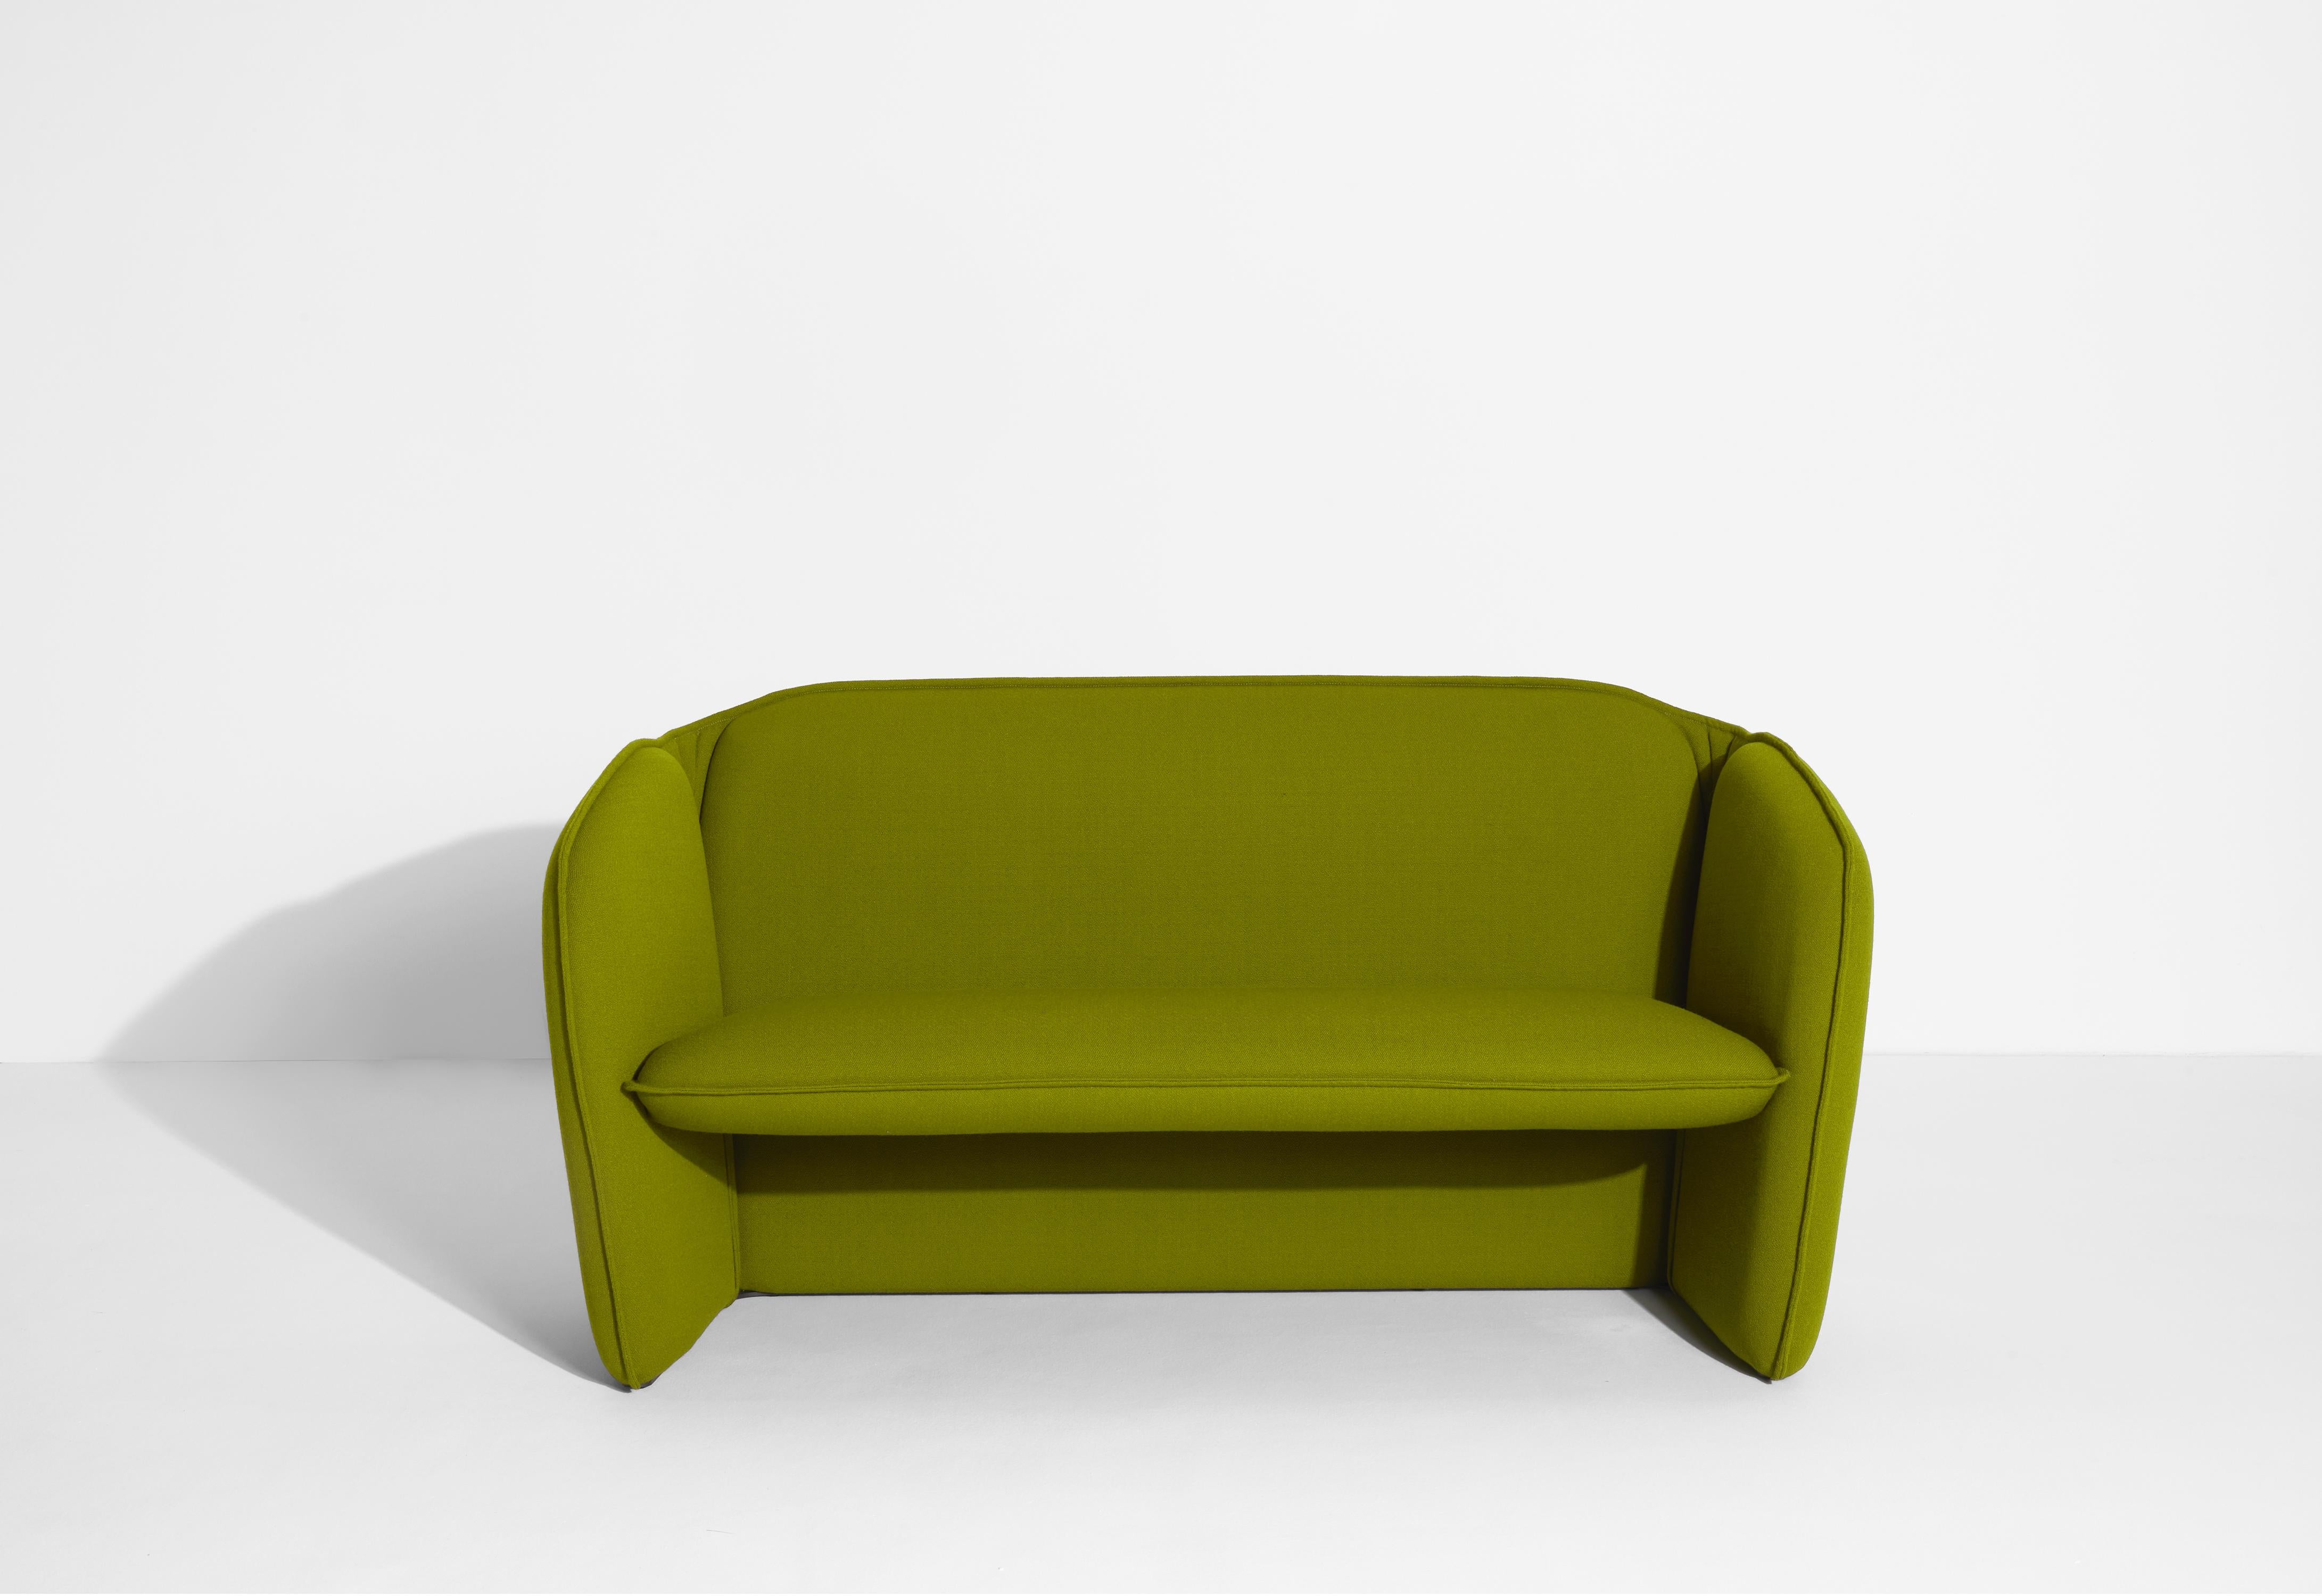 Contemporary Petite Friture Lily Sofa in Olive Green by Färg & Blanche, 2022 For Sale